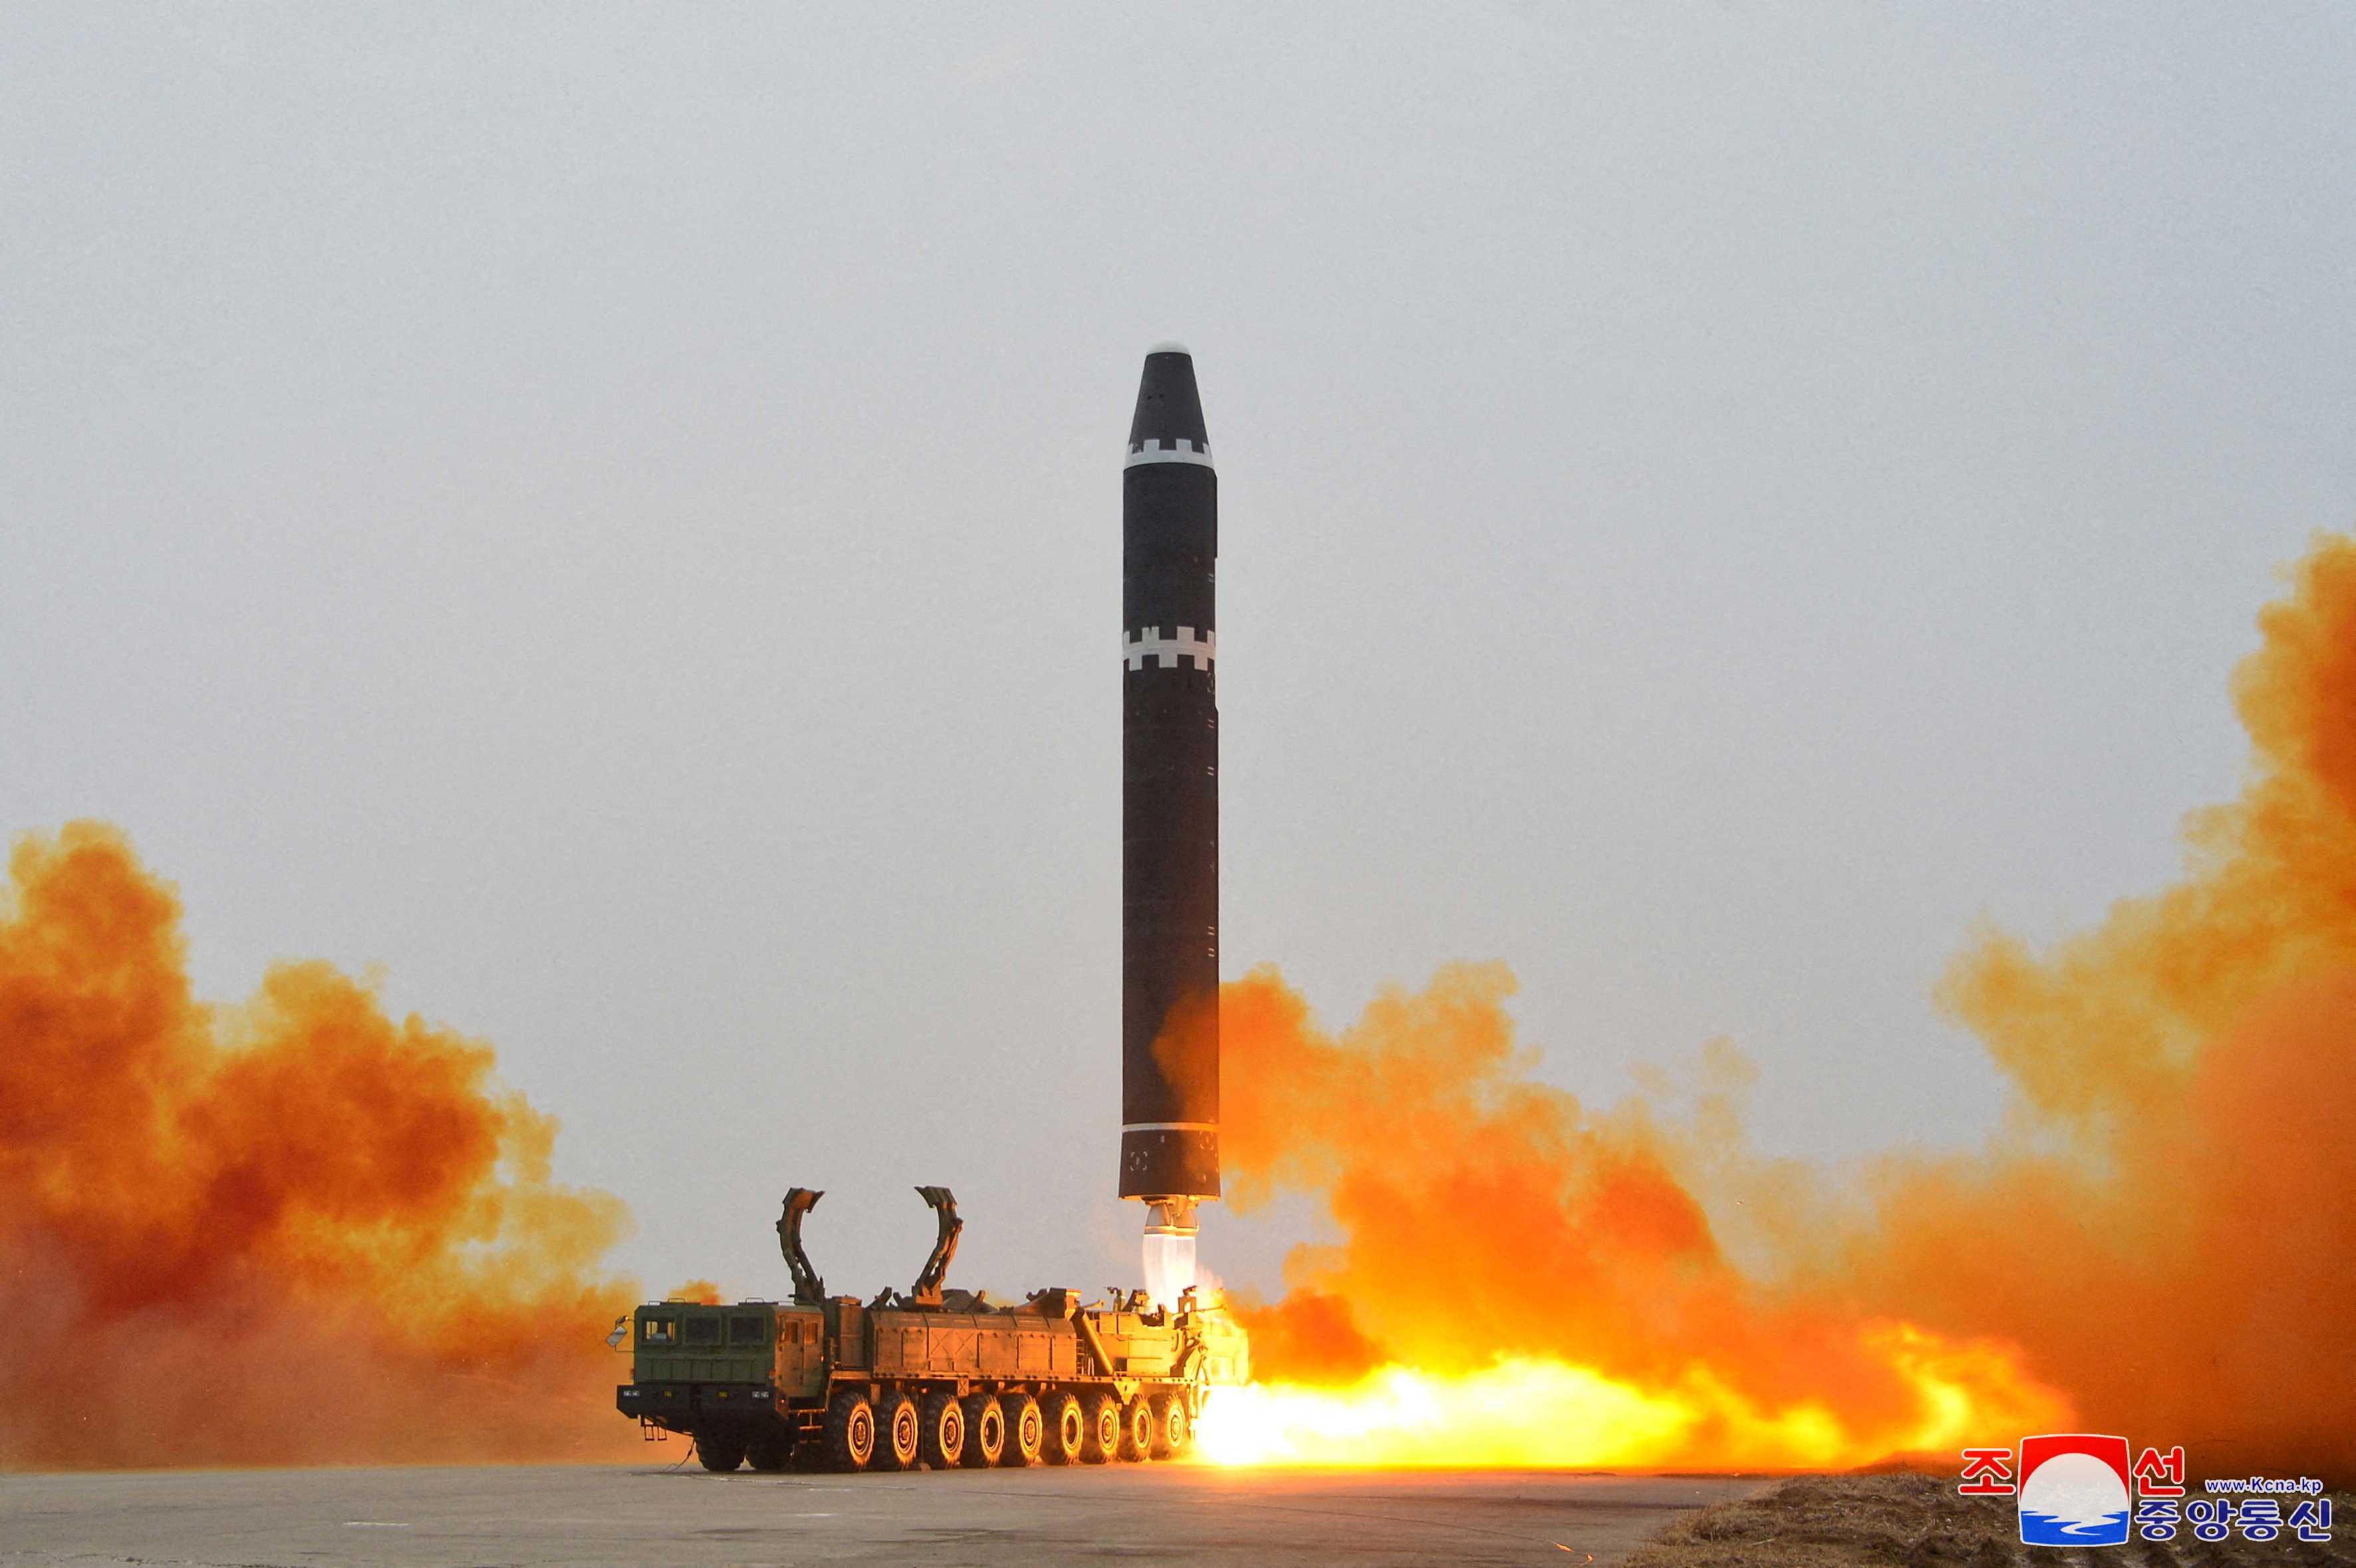 A Hwasong-15 intercontinental ballistic missile (ICBM) is launched at Pyongyang International Airport, in Pyongyang, North Korea Feb 18, in this photo released by North Korea's Korean Central News Agency (KCNA). Photo: Reuters